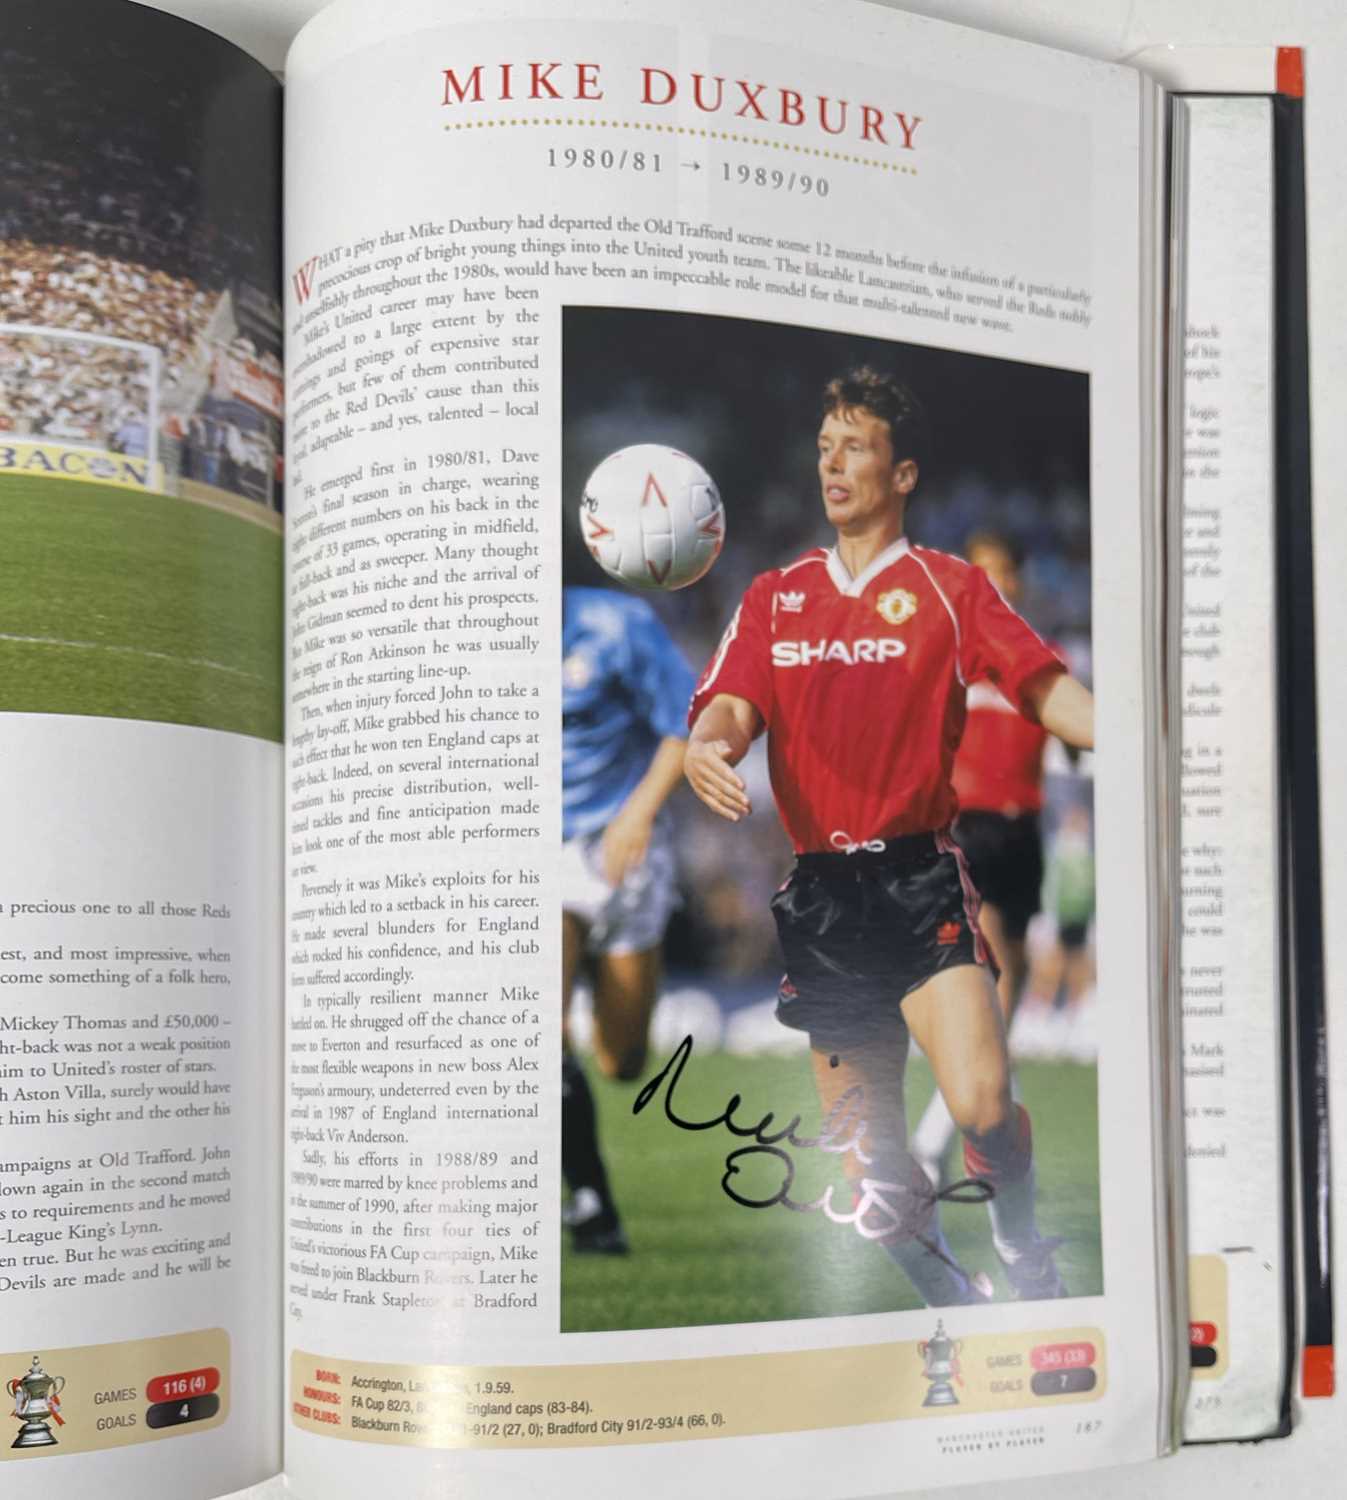 FOOTBALL MEMORABILIA - MANCHESTER UNITED MULTI SIGNED 'PLAYER BY PLAYER' BOOK. - Image 27 of 50